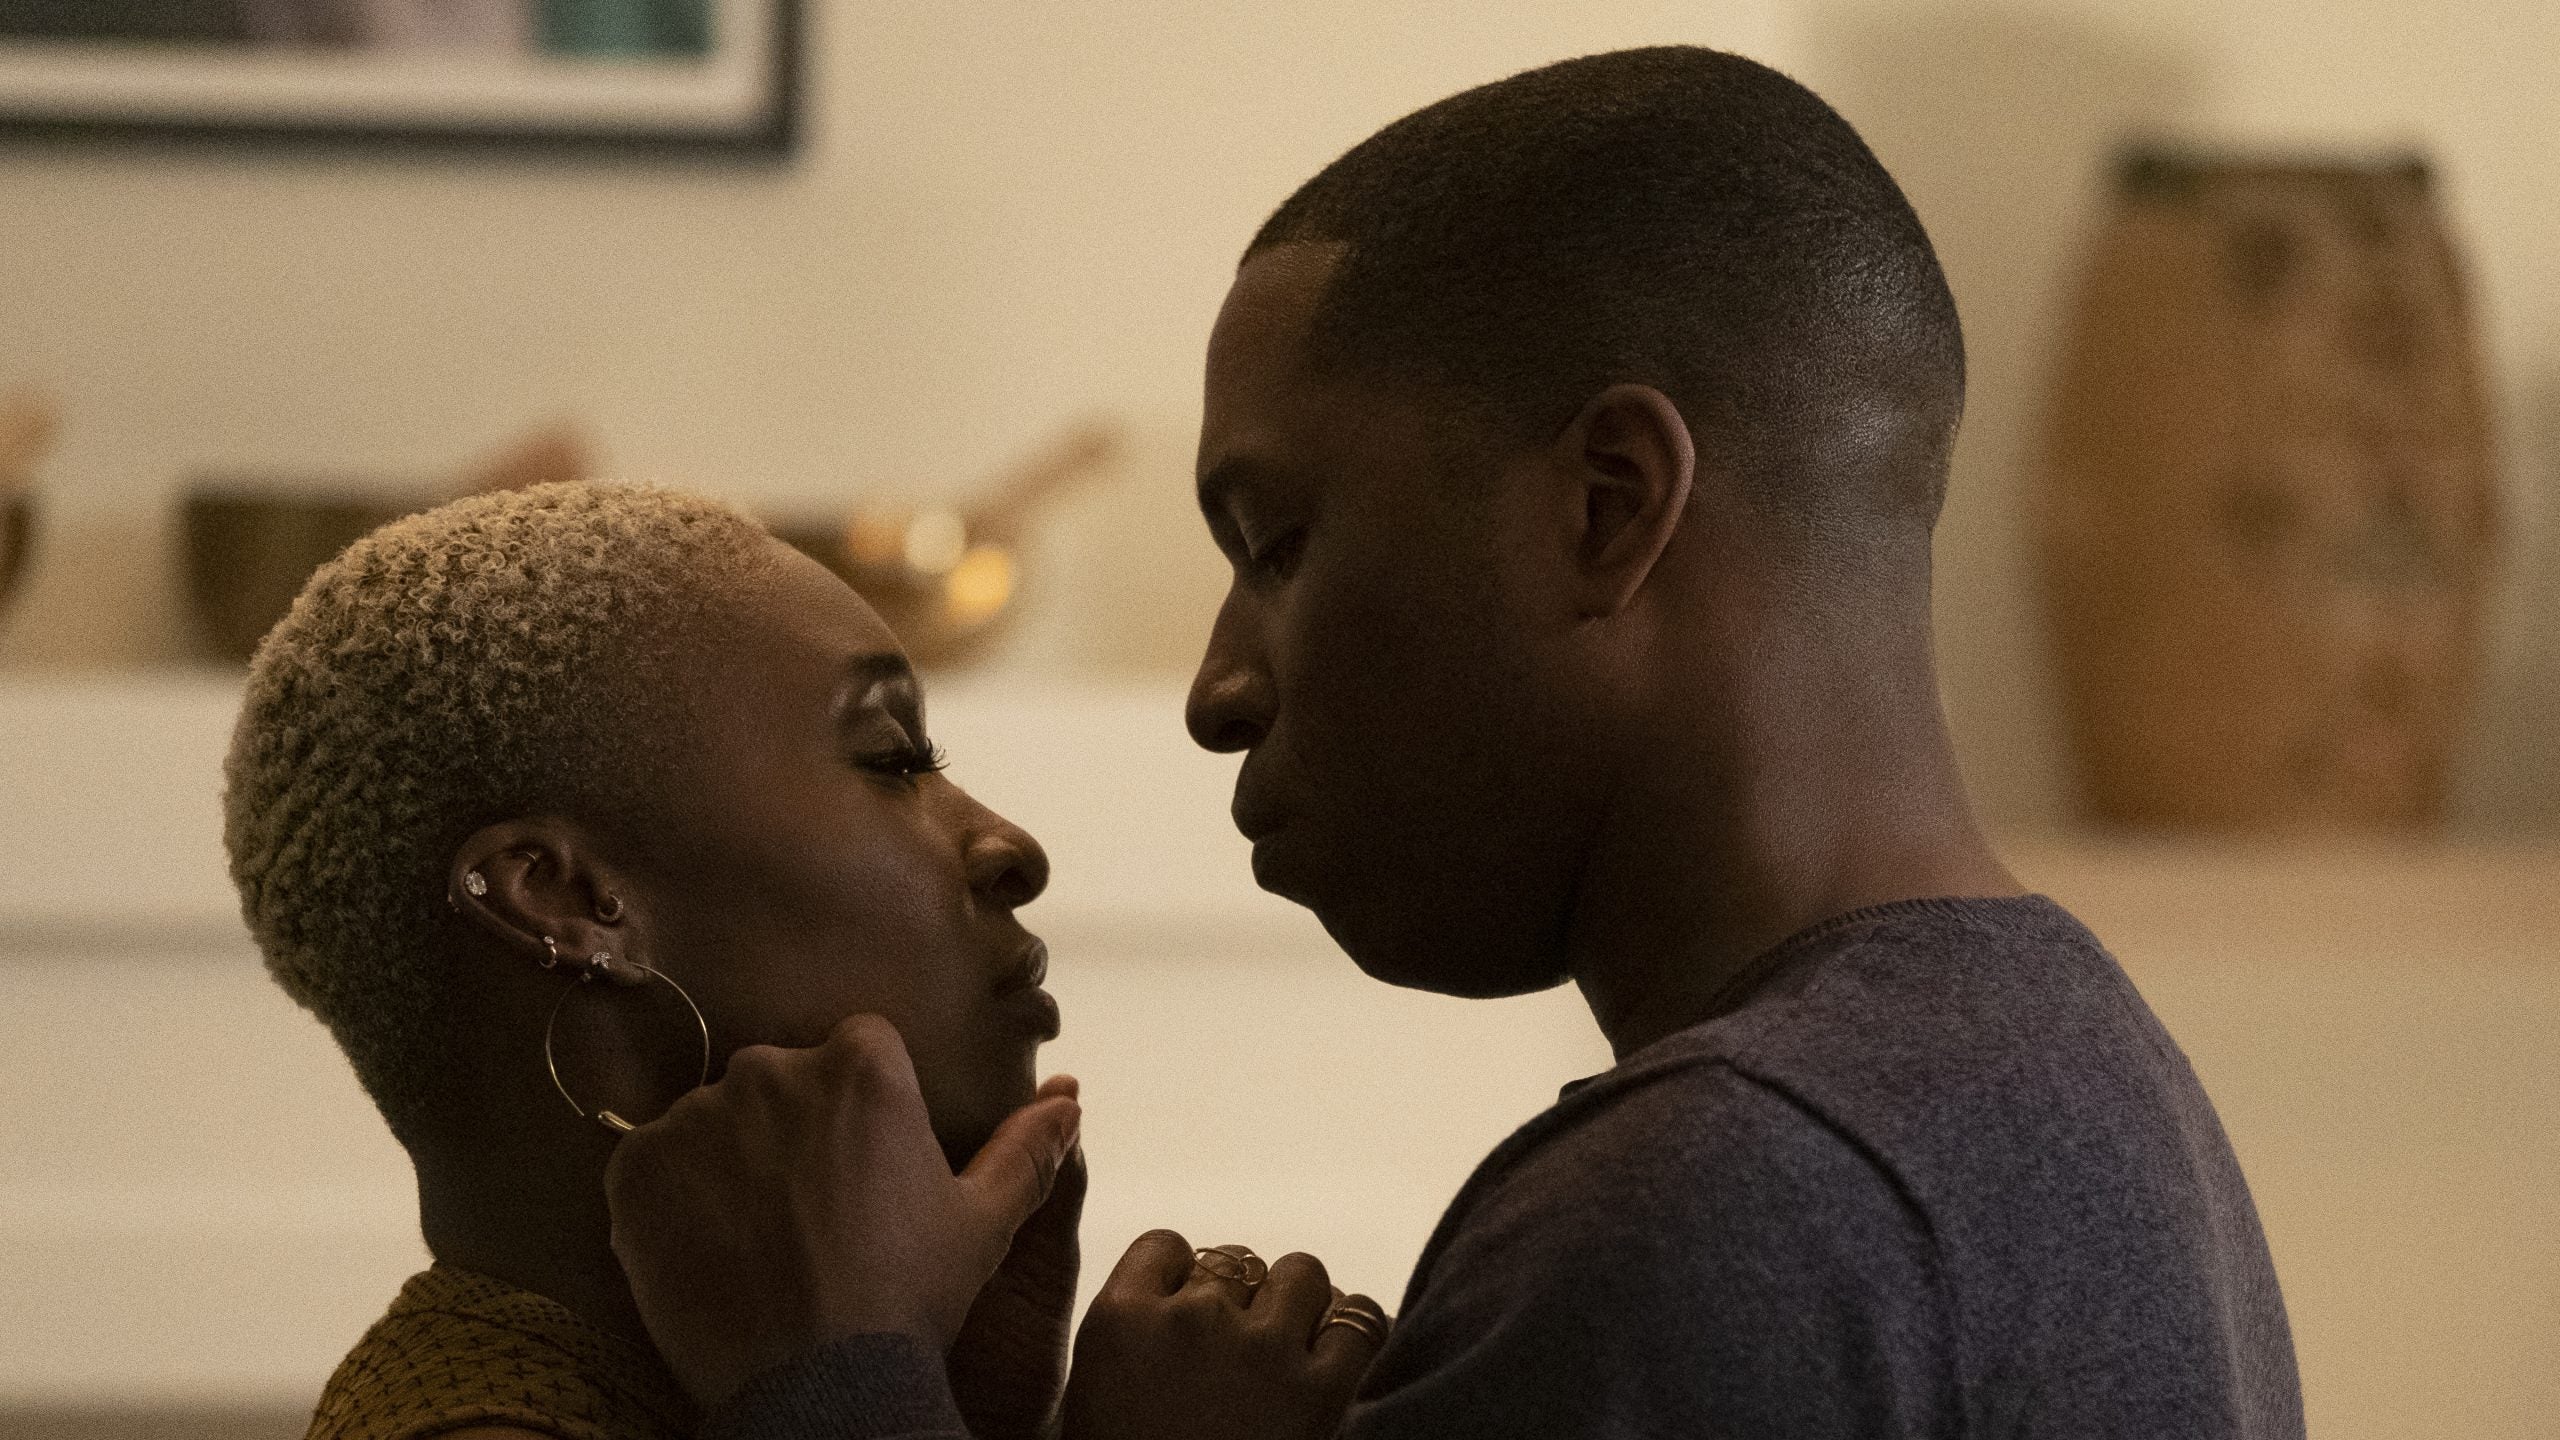 First Look: Cynthia Erivo And Leslie Odom Jr. Star In 'Needle in a Timestack'